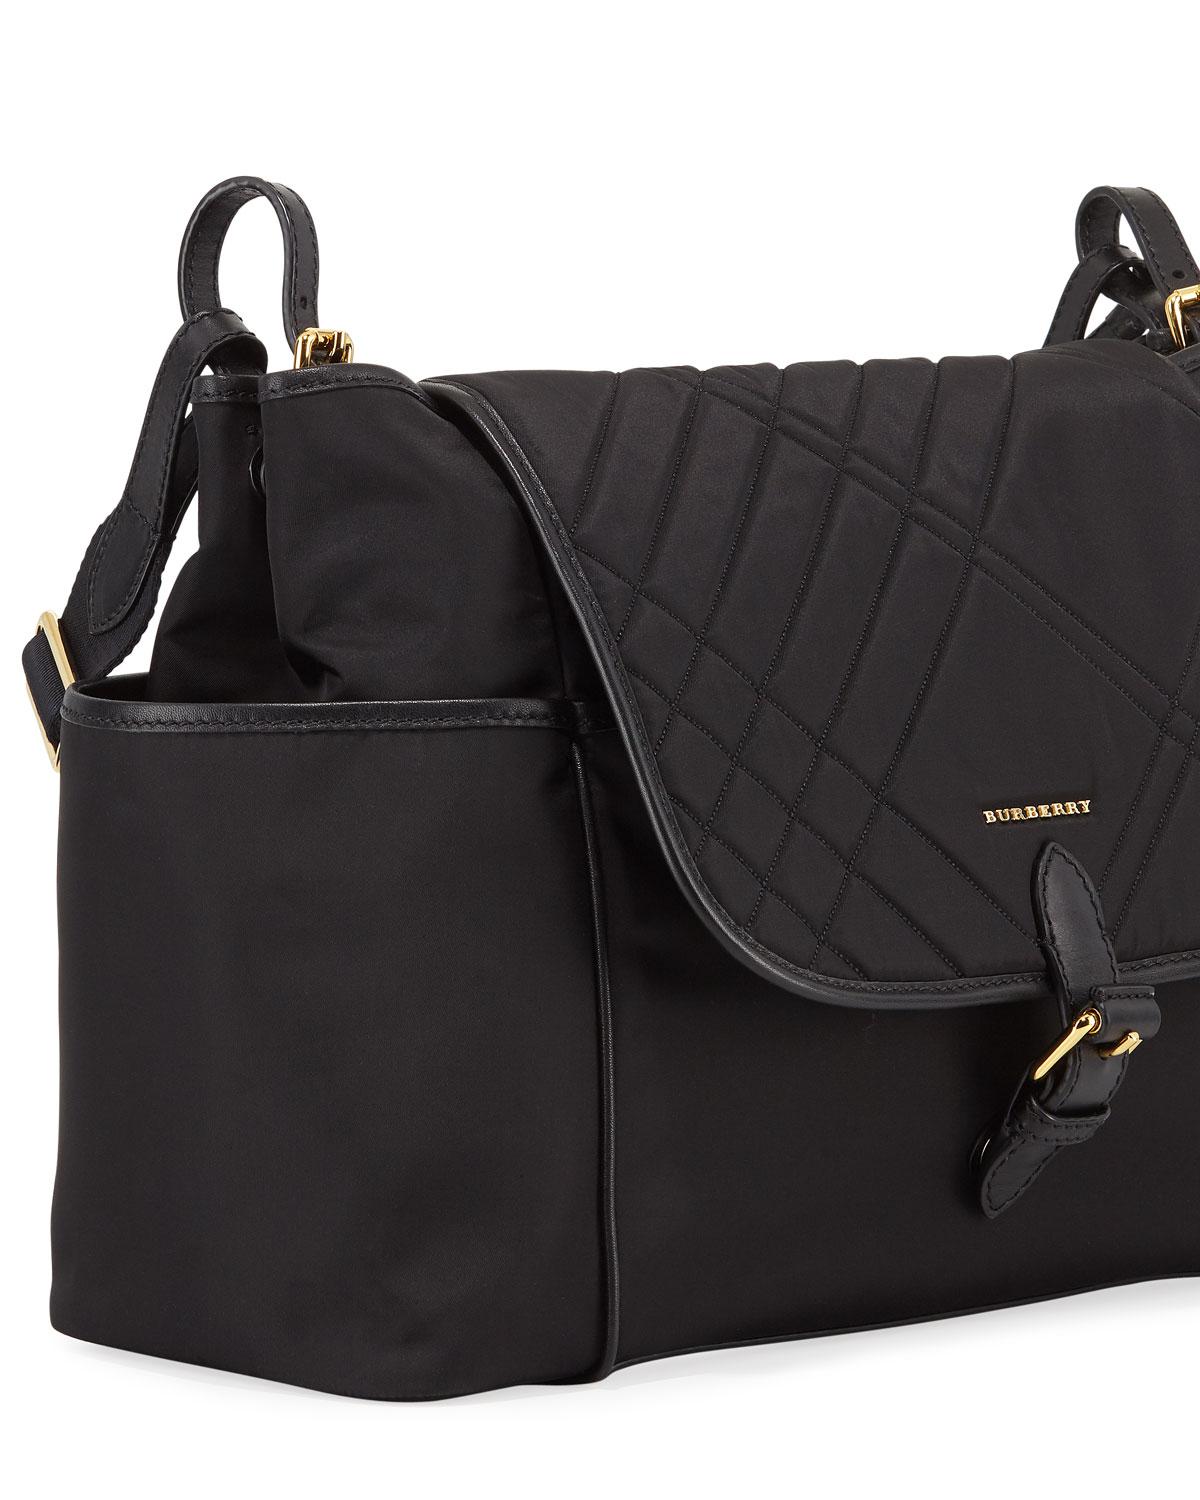 Burberry Synthetic Flap-top Quilted Diaper Bag in Black - Lyst